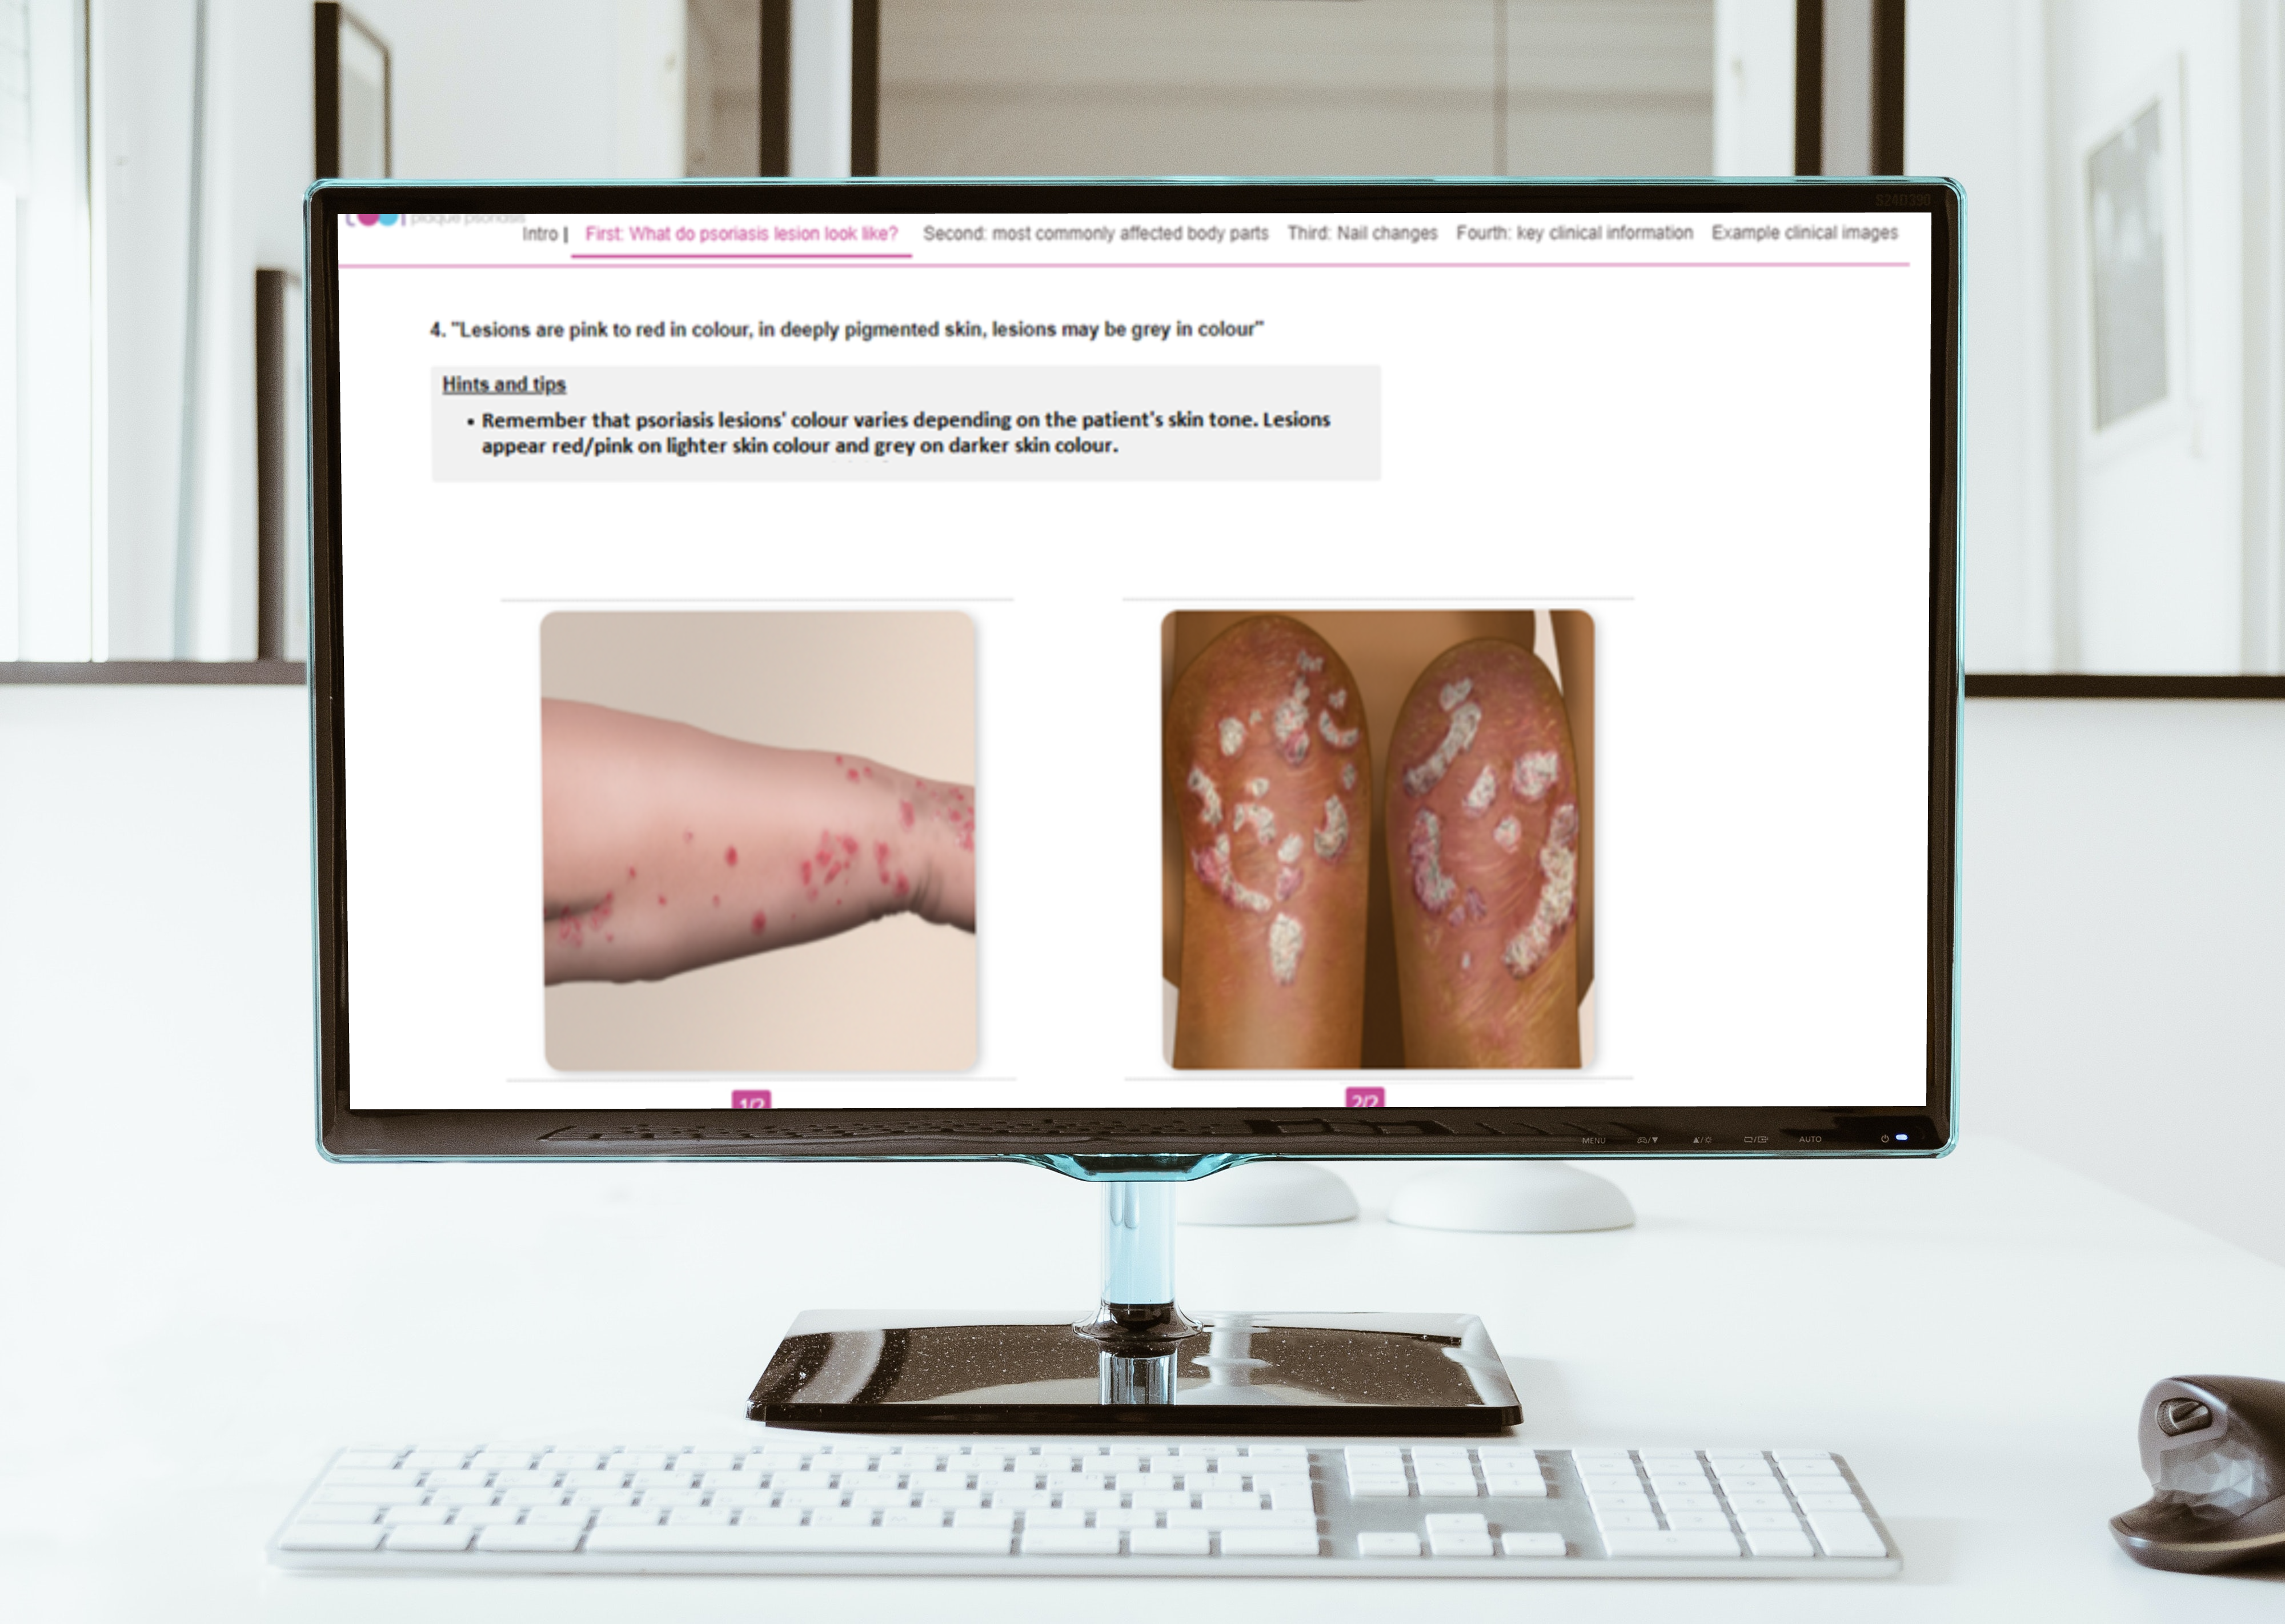 A computer screen shows the training tool comparing two images of psoriatic disease, one on a white arm, and the other on darker tone legs.